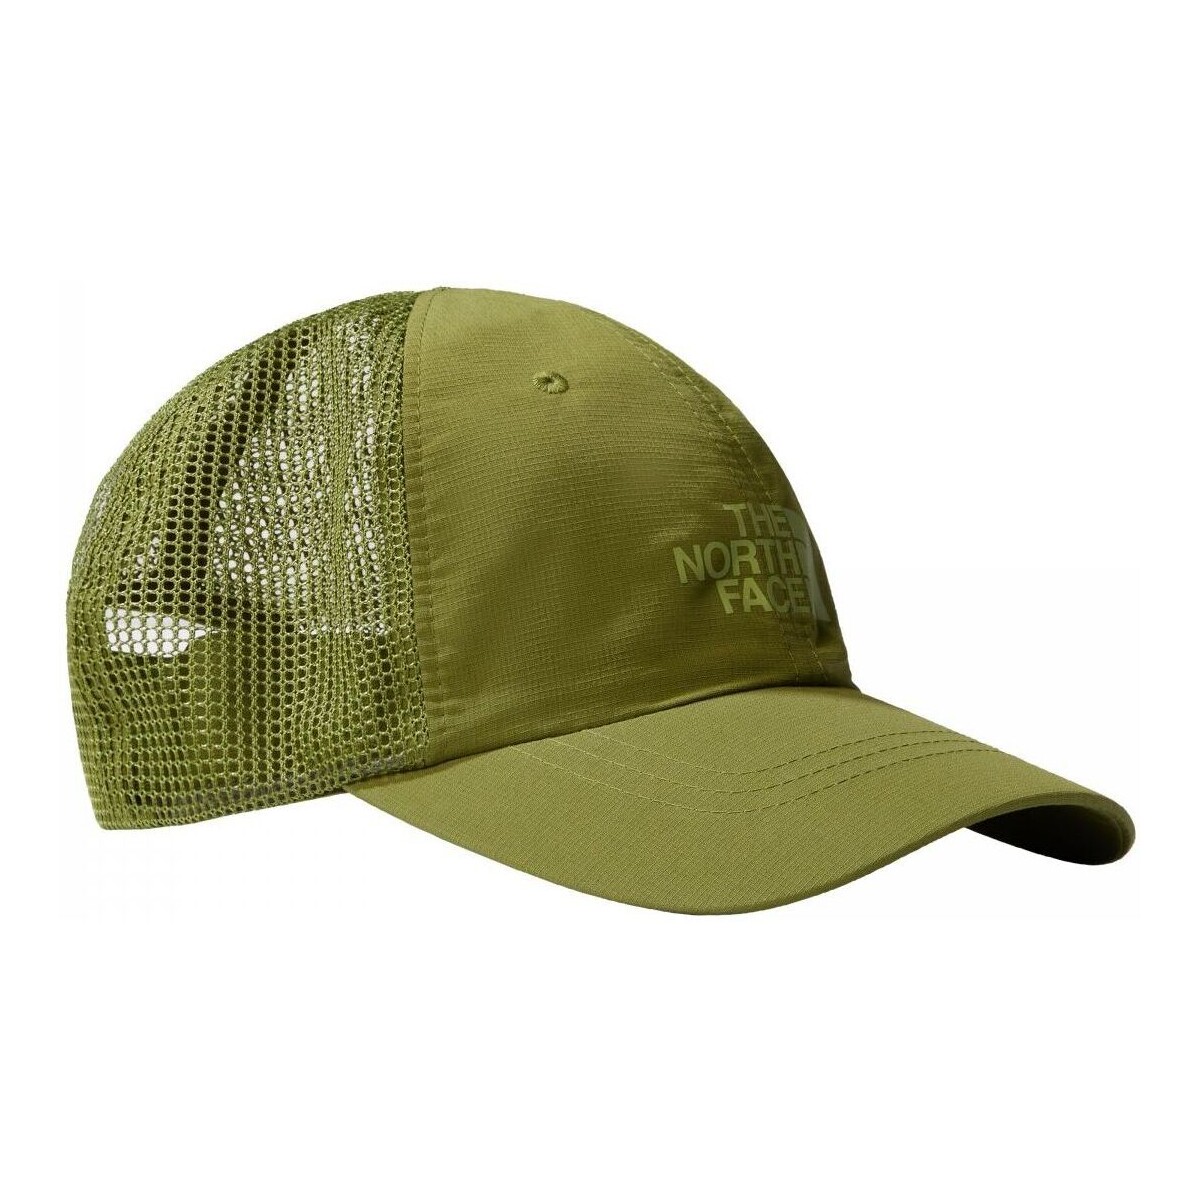 Accesorios textil Sombrero The North Face NF0A5FXSPIB1 TRUCKER-FOREST OLIVE Verde